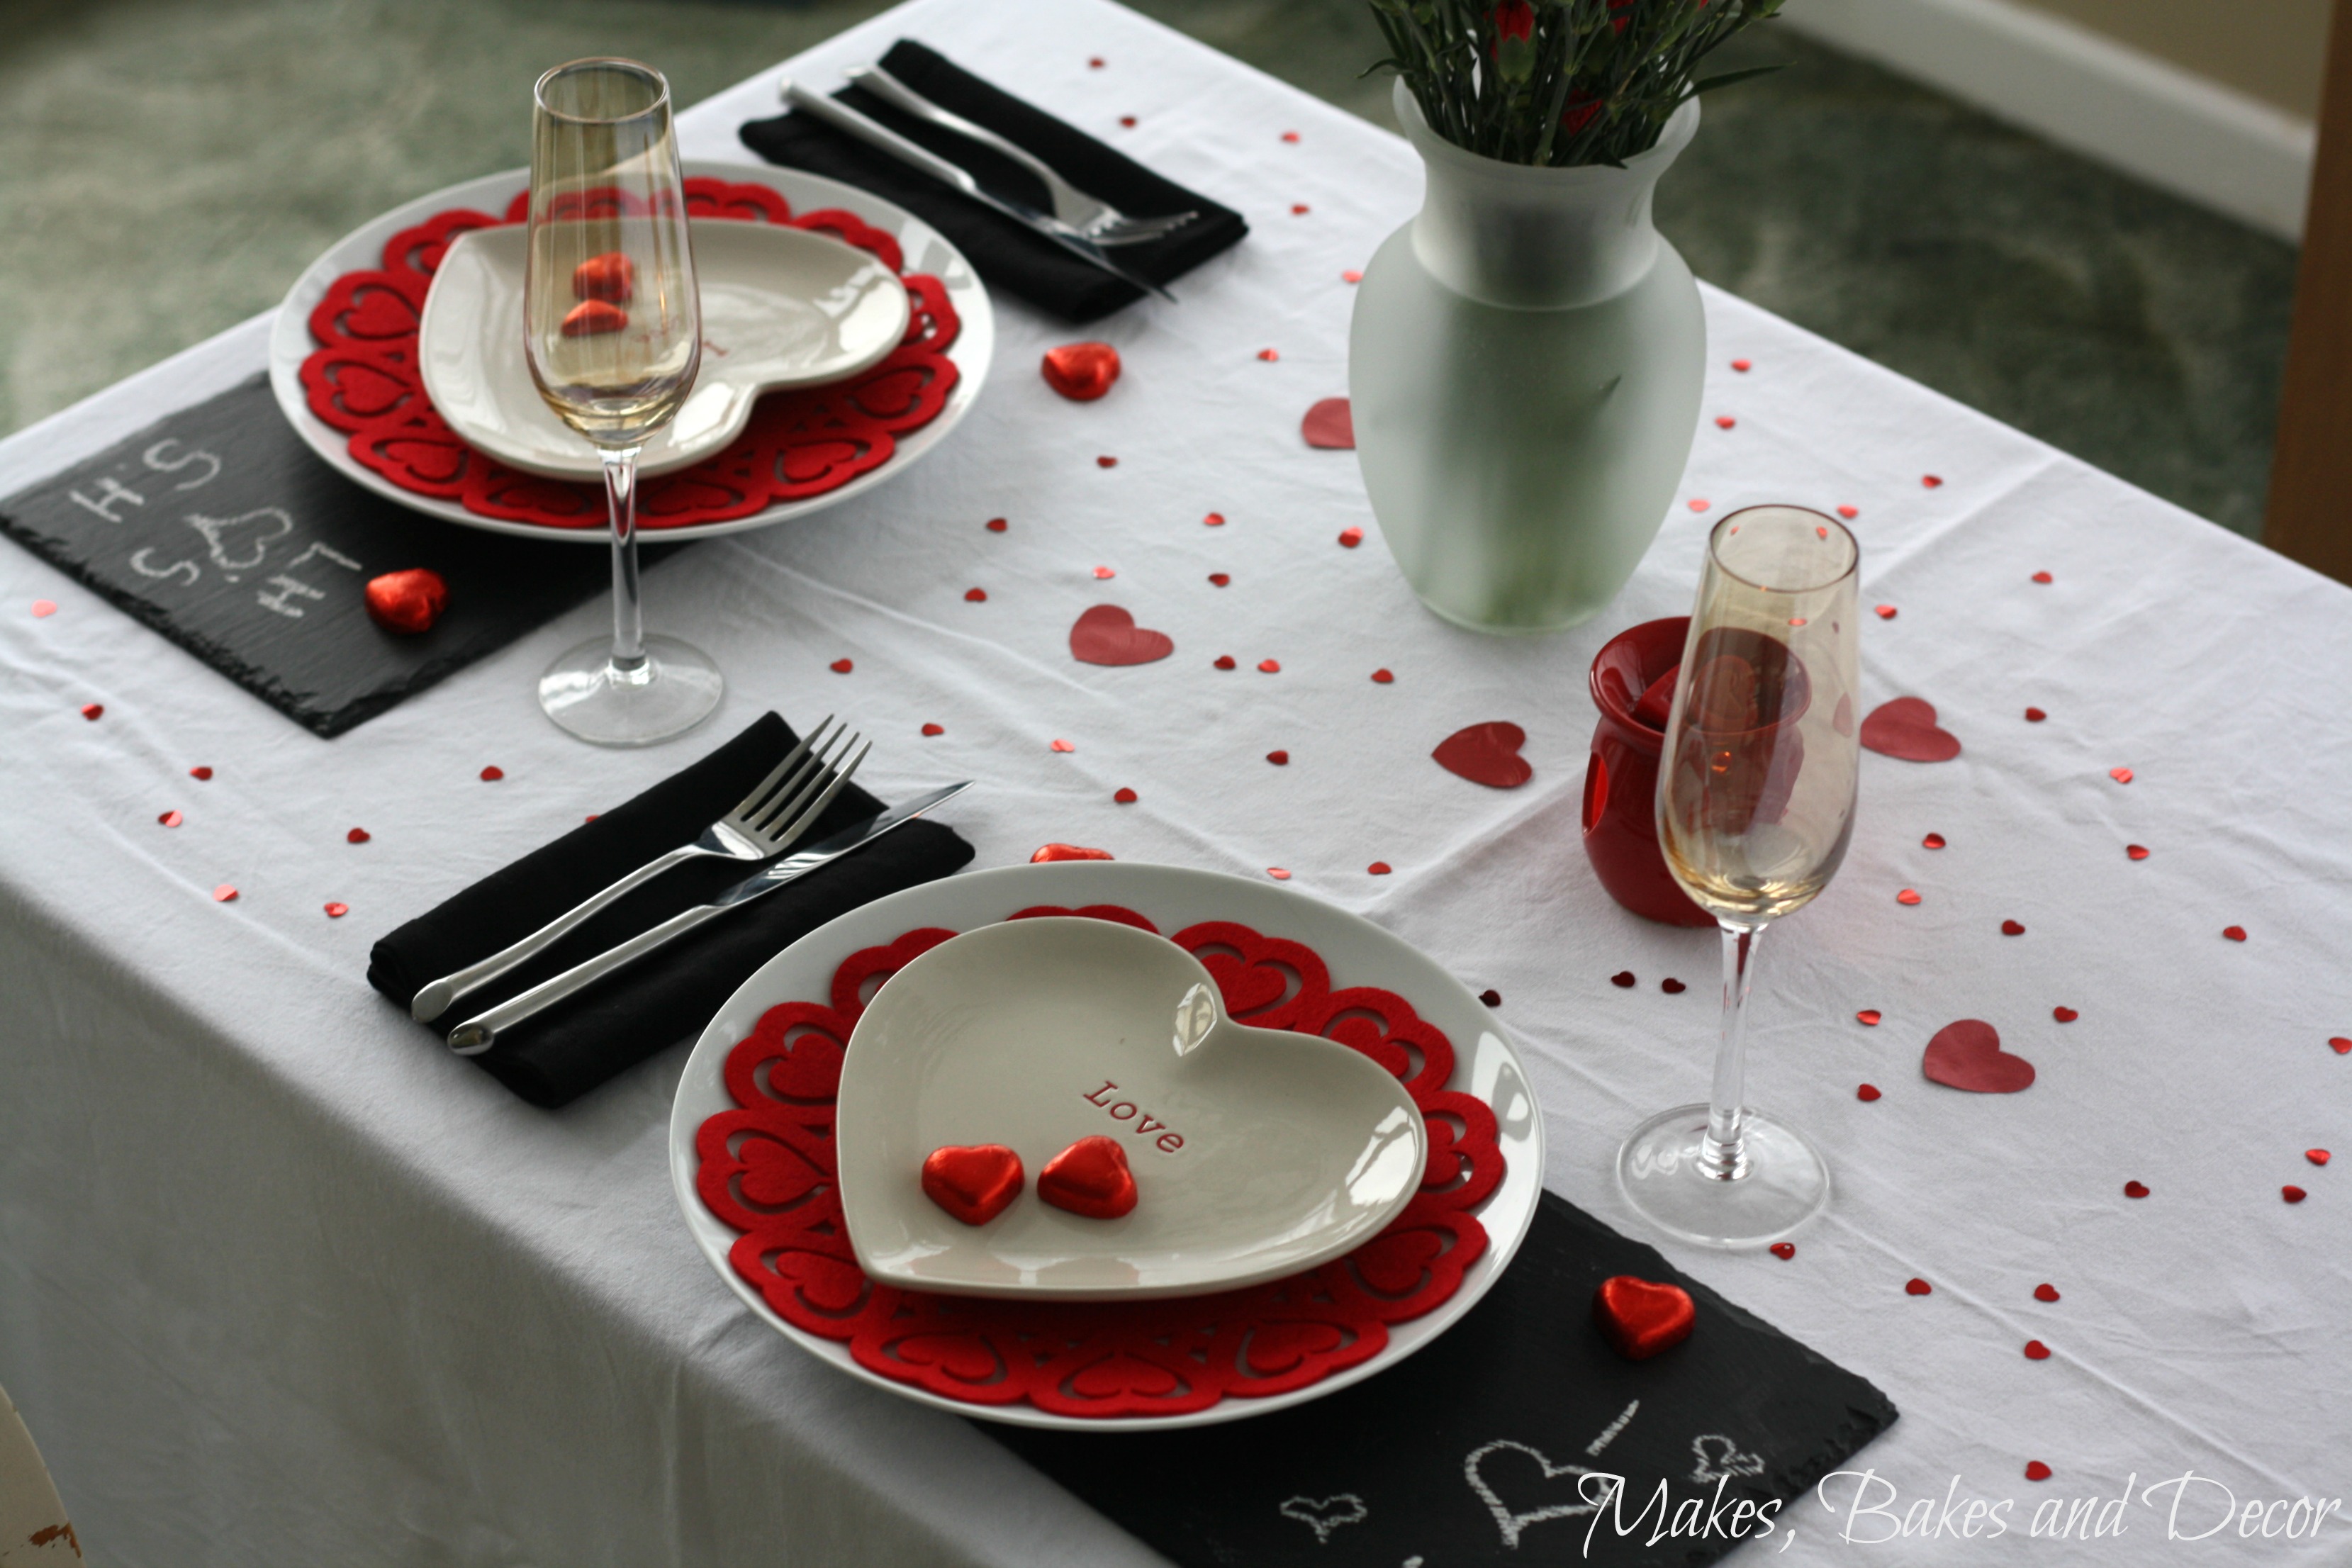 romantic table for two